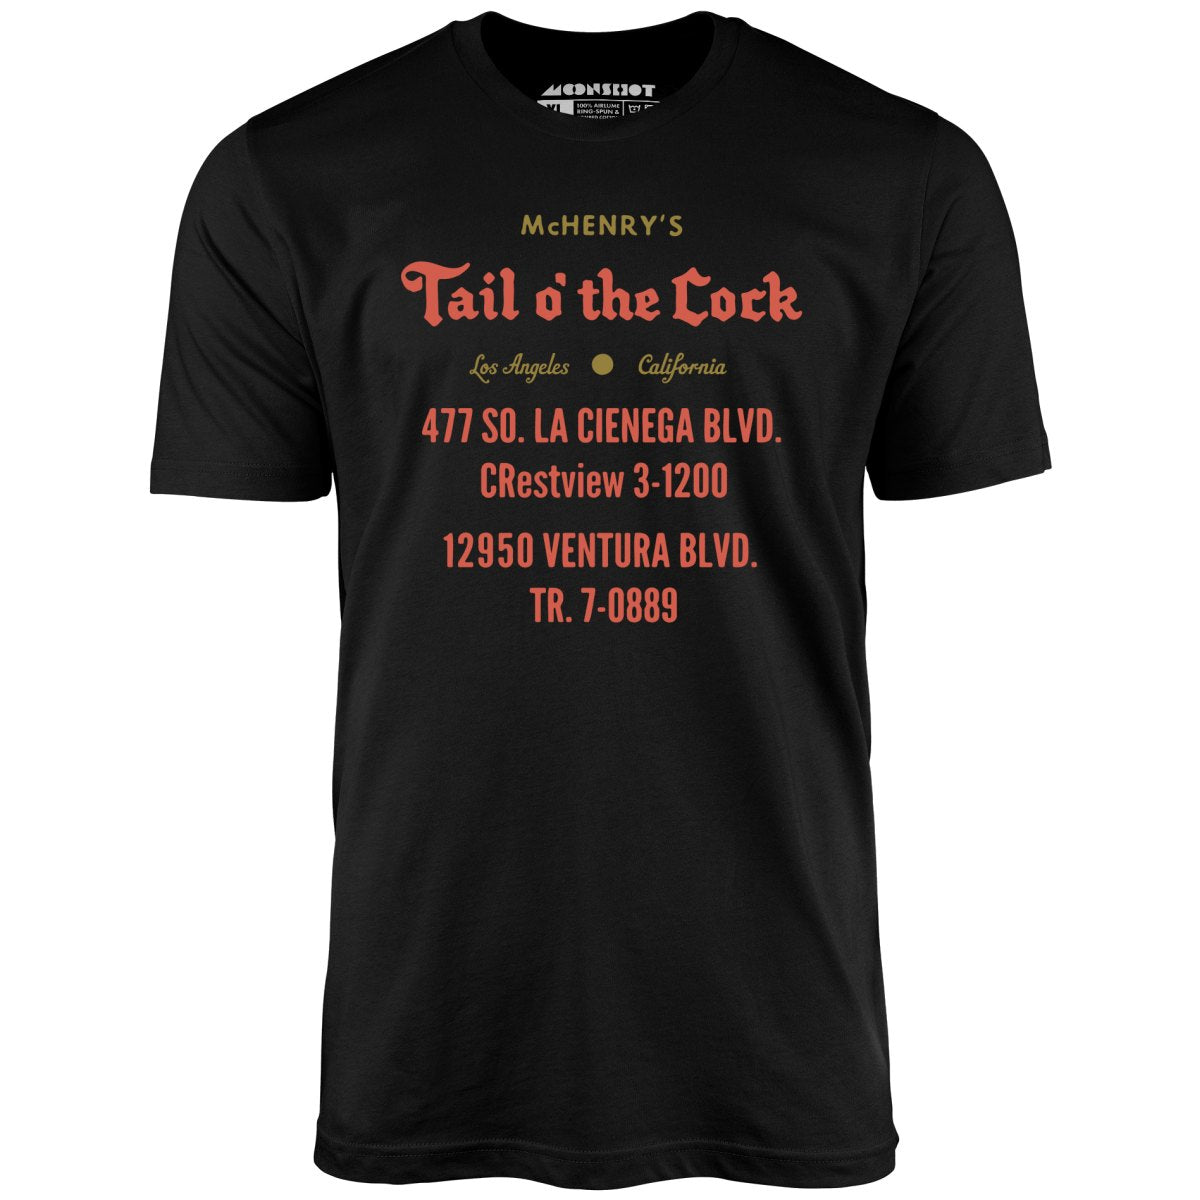 McHenry's Tail o' the Cock - Los Angeles, CA - Vintage Restaurant - Unisex T-Shirt